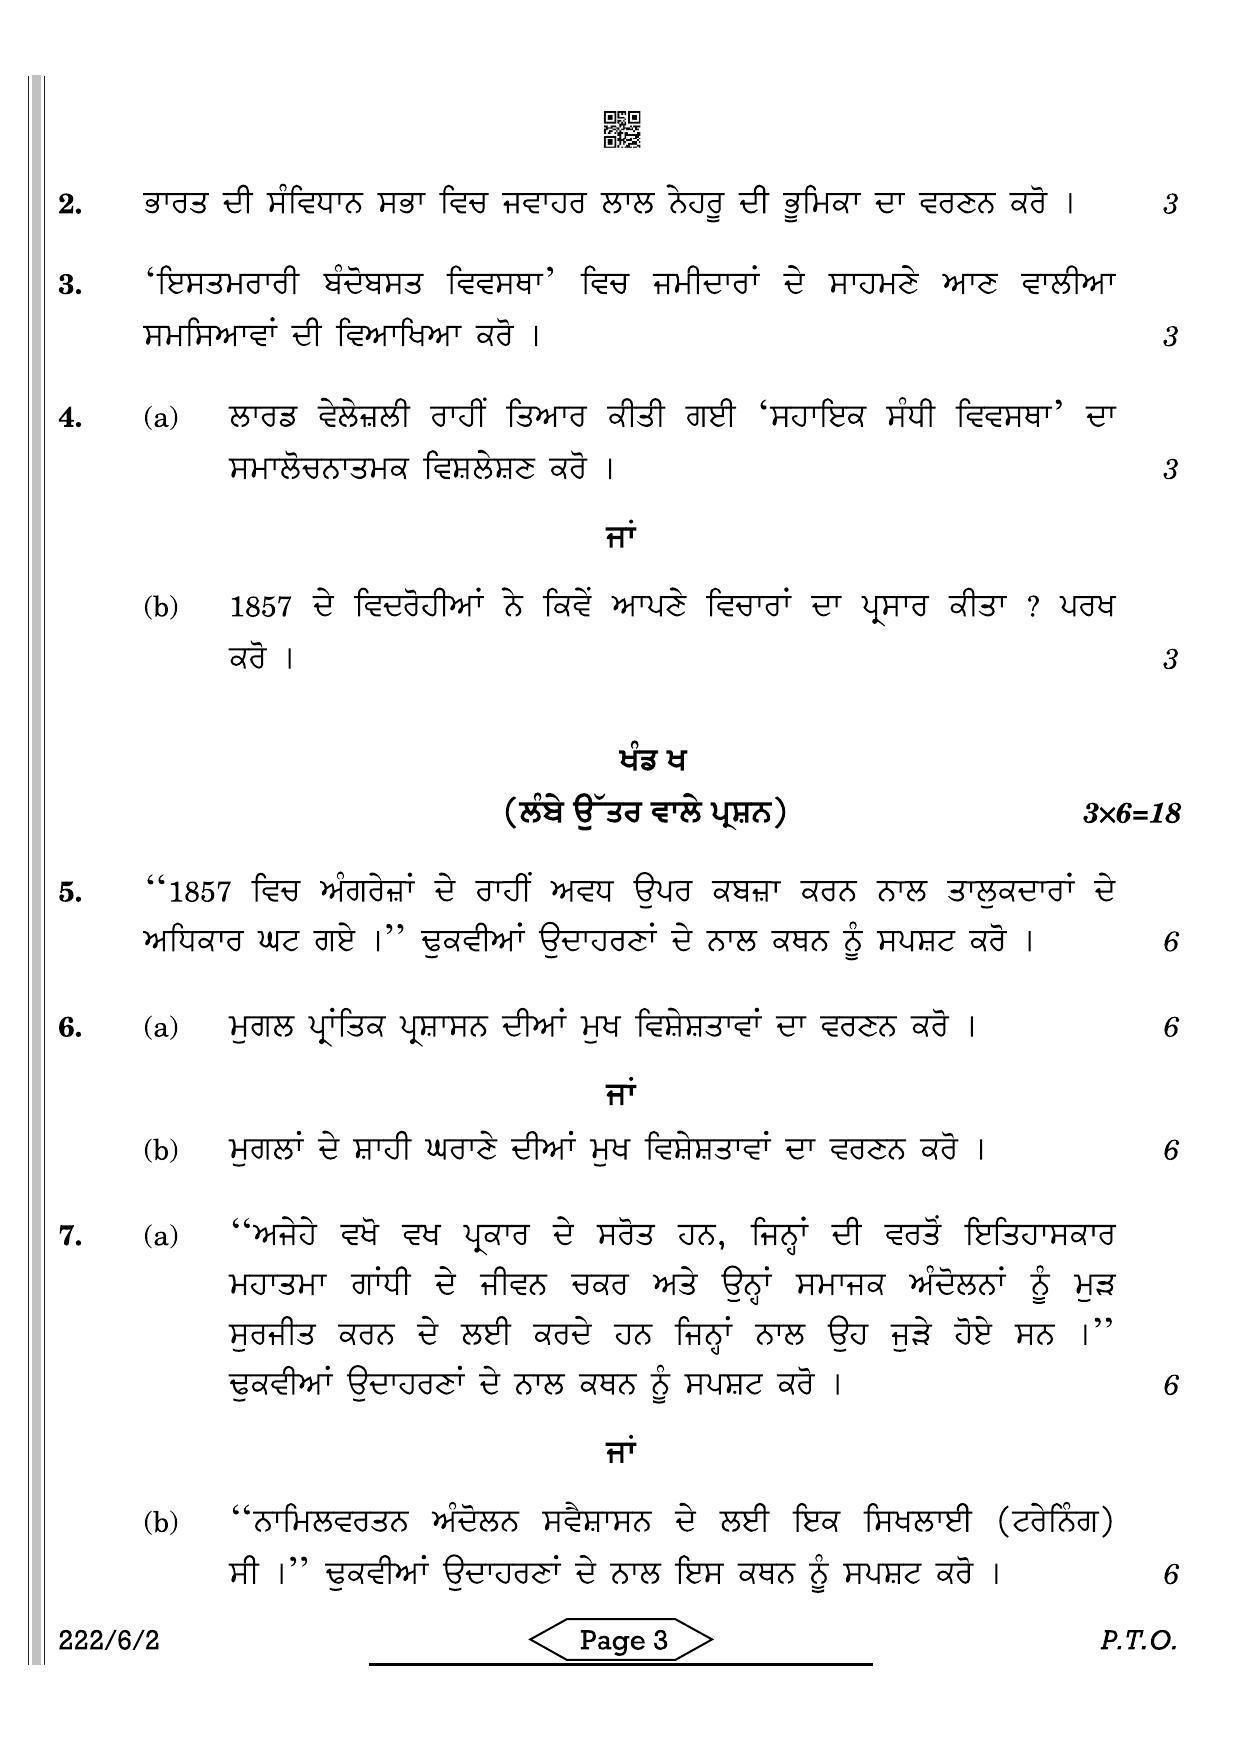 CBSE Class 12 222-6-2 History Punjabi 2022 Compartment Question Paper - Page 3